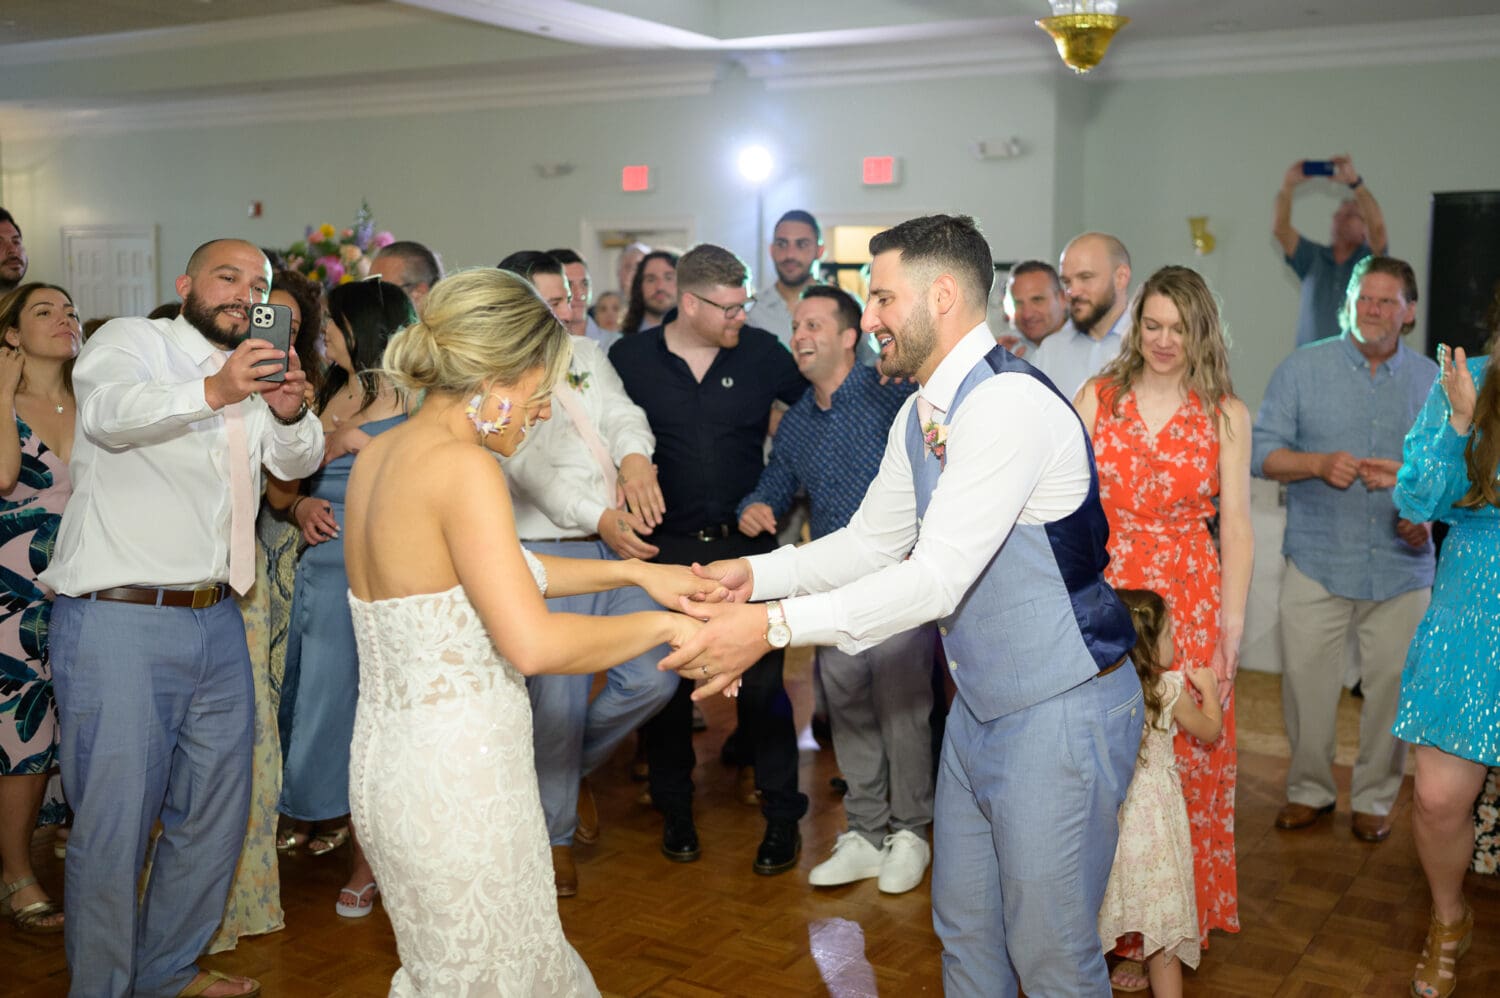 Lots of dancing fun after the first dance - Pawleys Plantation Golf & Country Club